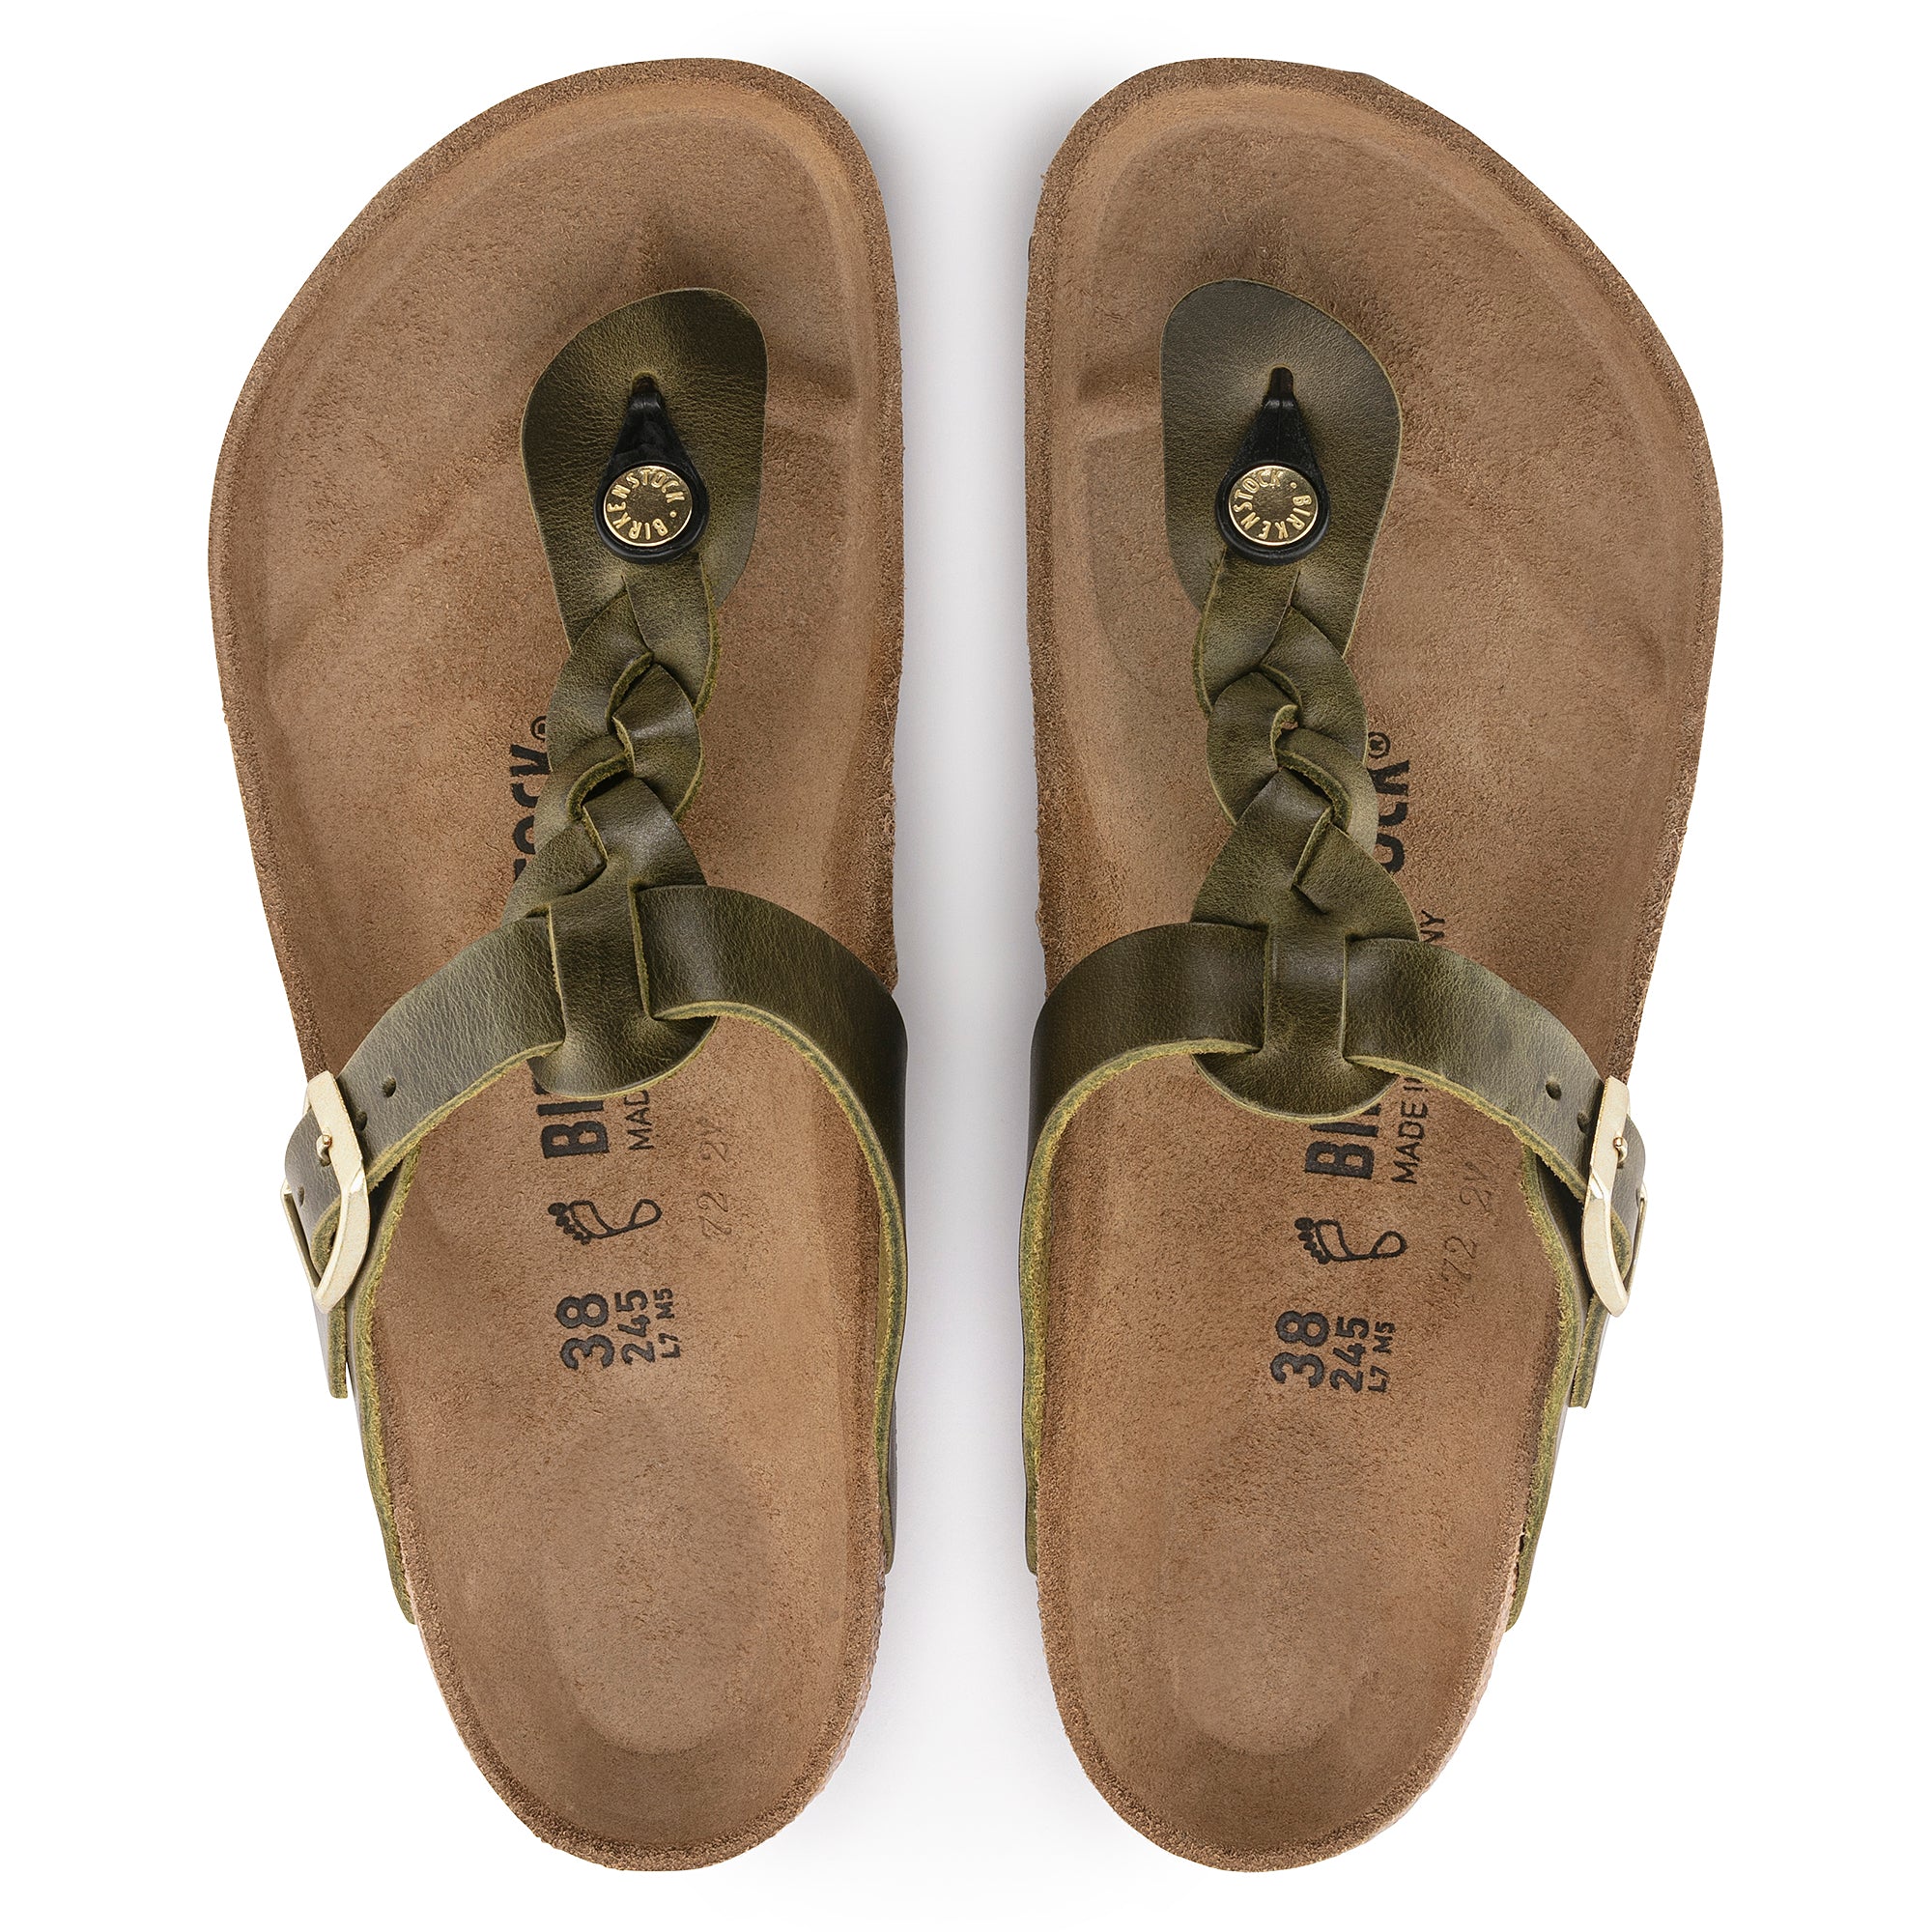 Birkenstock Limited Edition Gizeh Braid green olive oiled leather